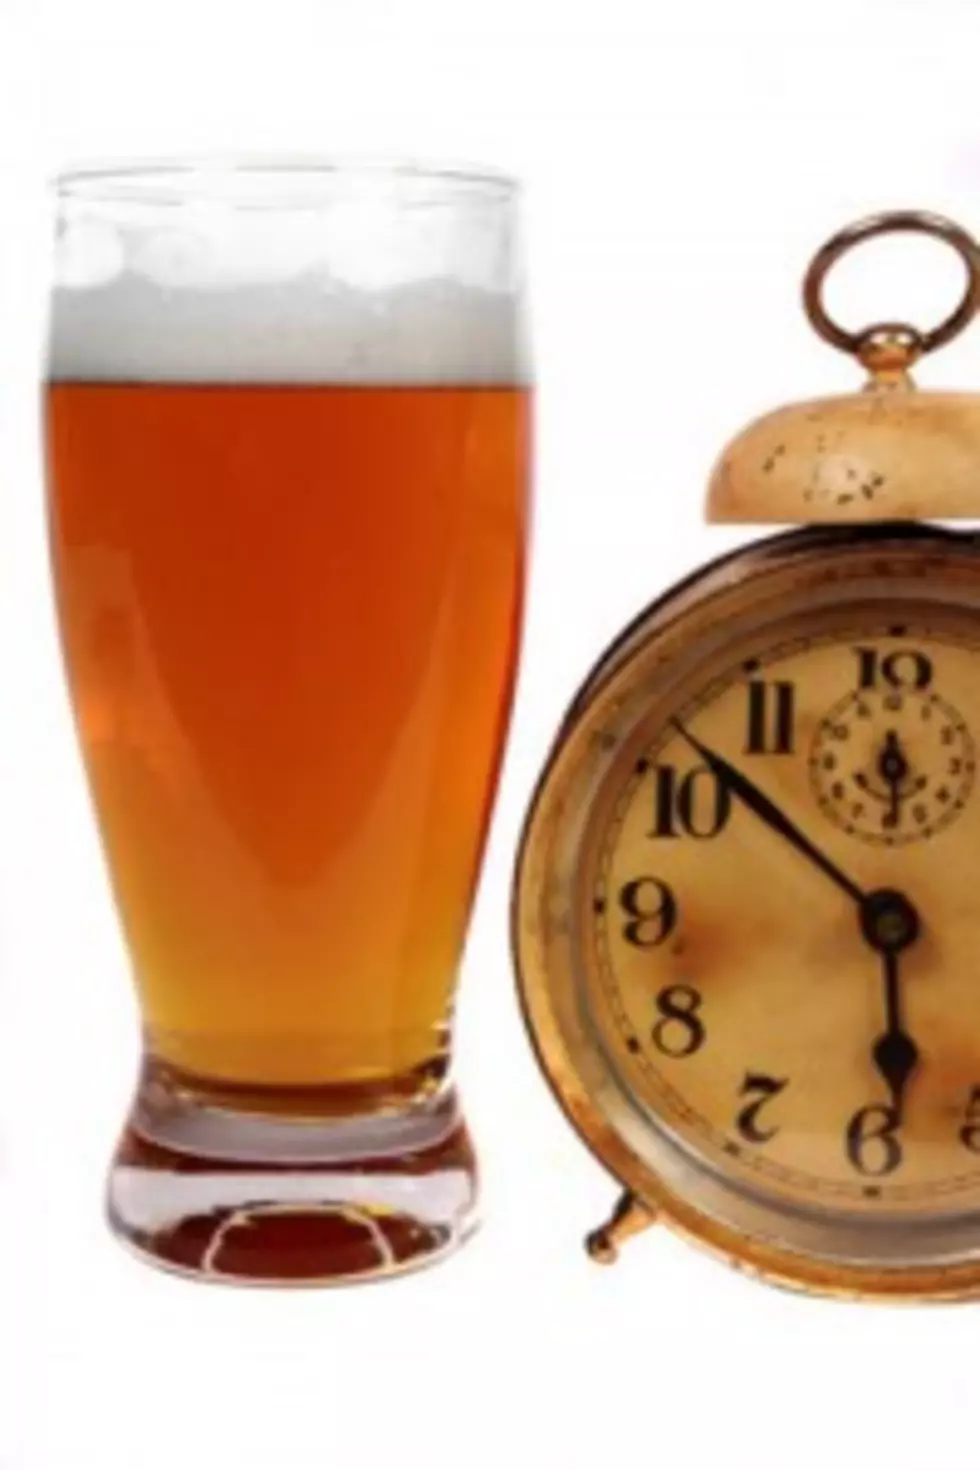 Don&#8217;t Waste Flat Beer It&#8217;s Alcohol Abuse &#8211; USE IT!